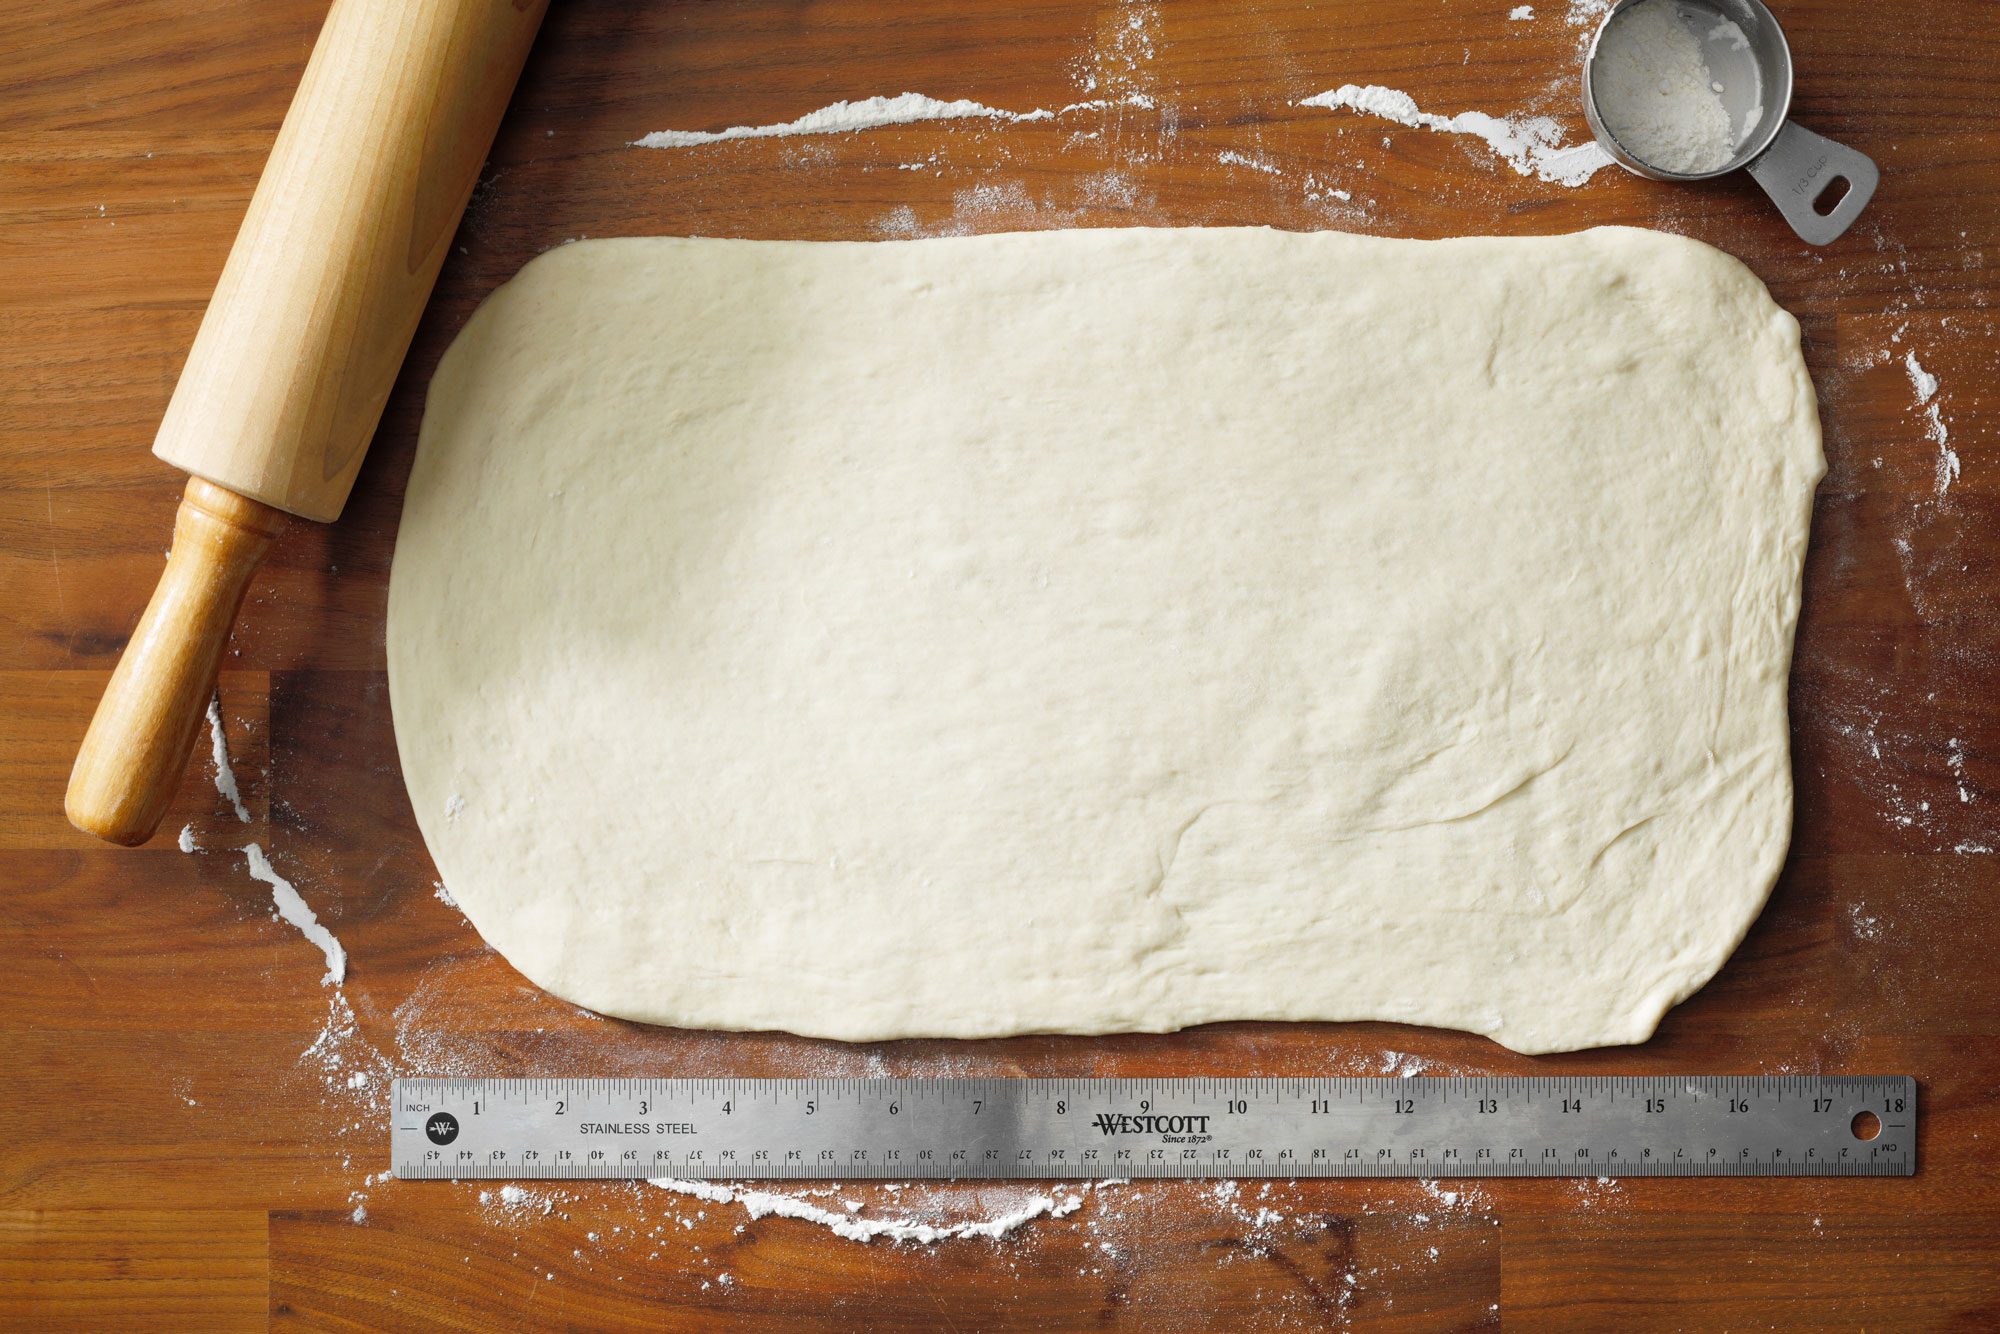 On a lightly floured surface, roll the dough into a rectangle